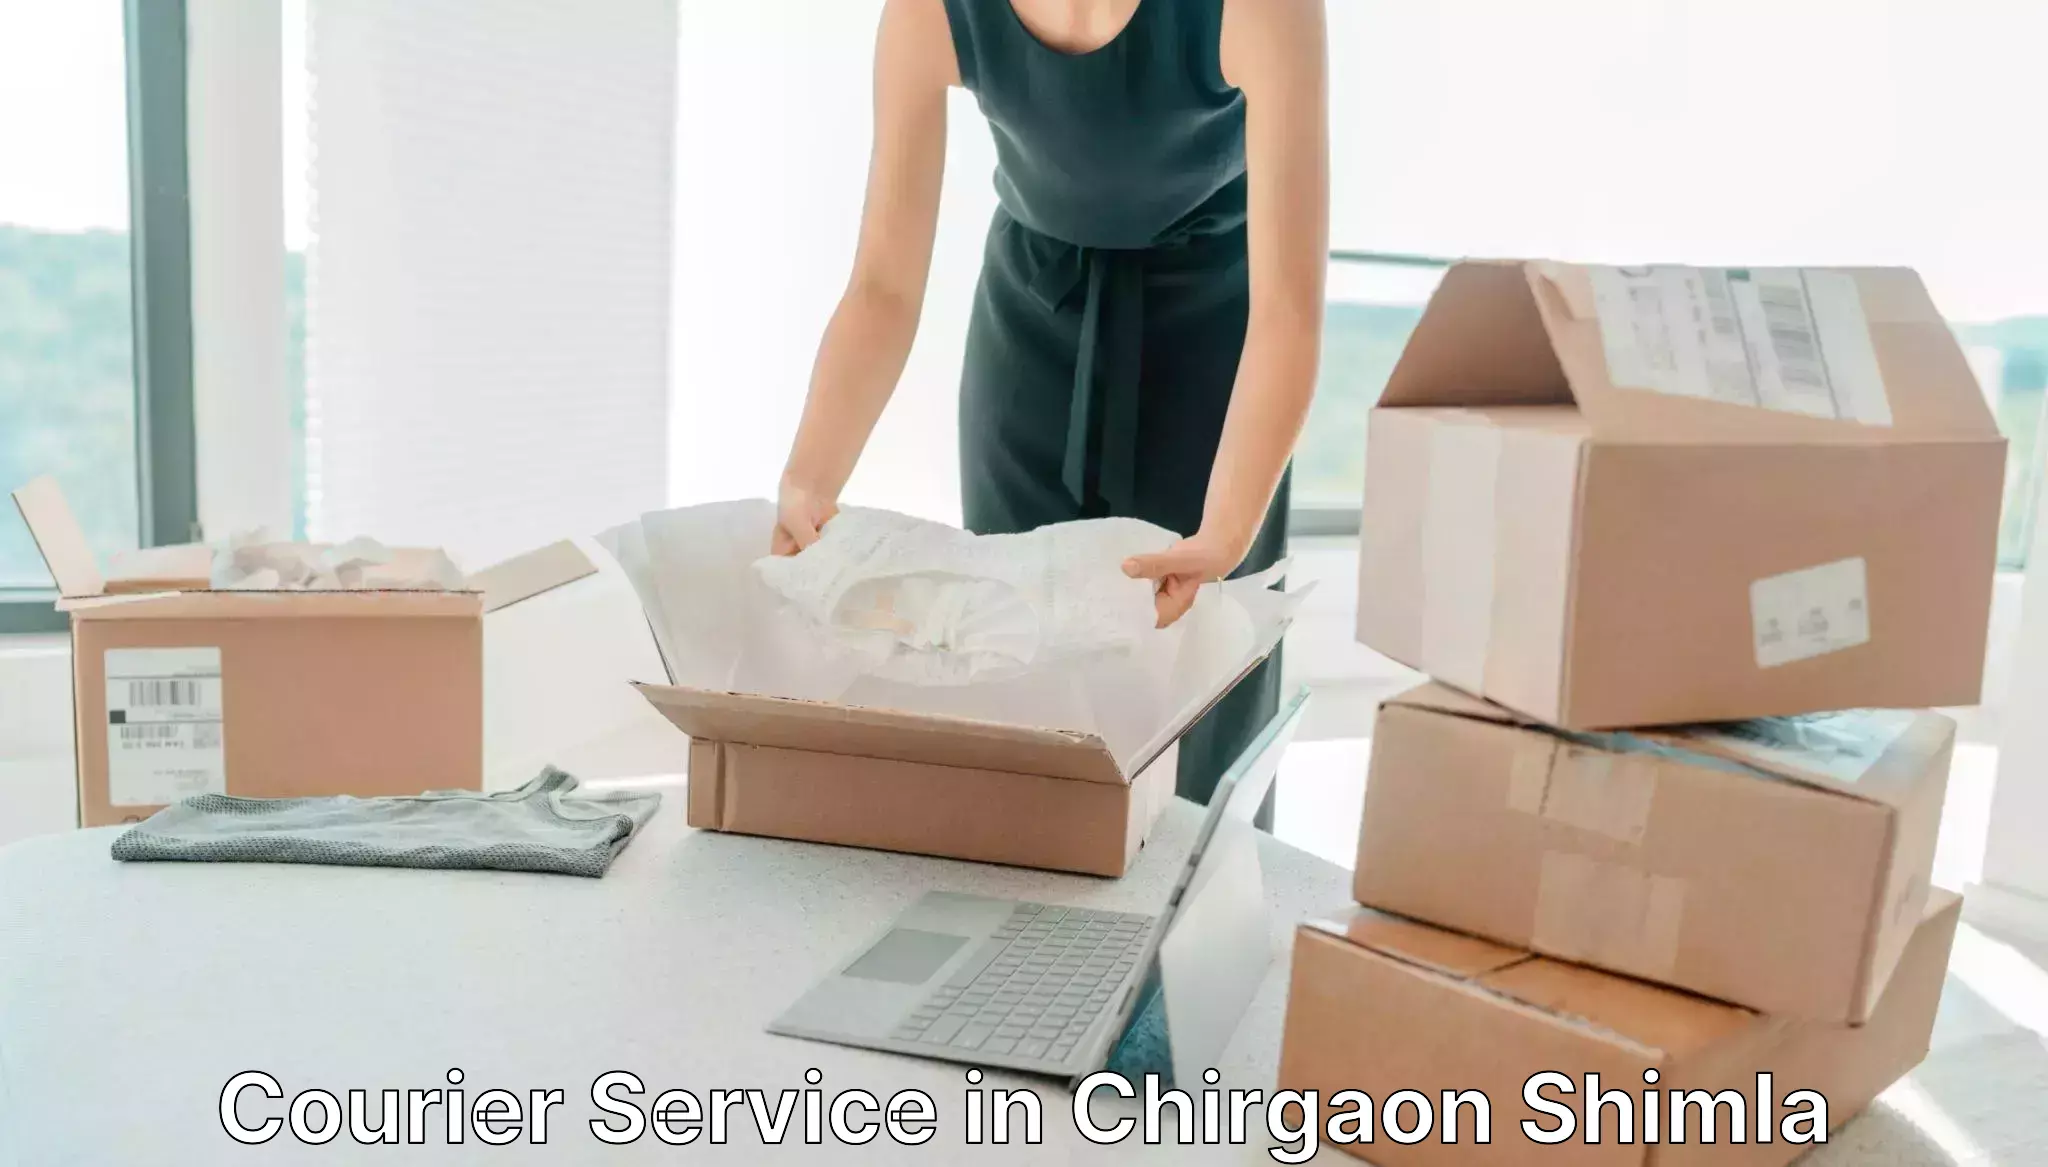 Diverse delivery methods in Chirgaon Shimla